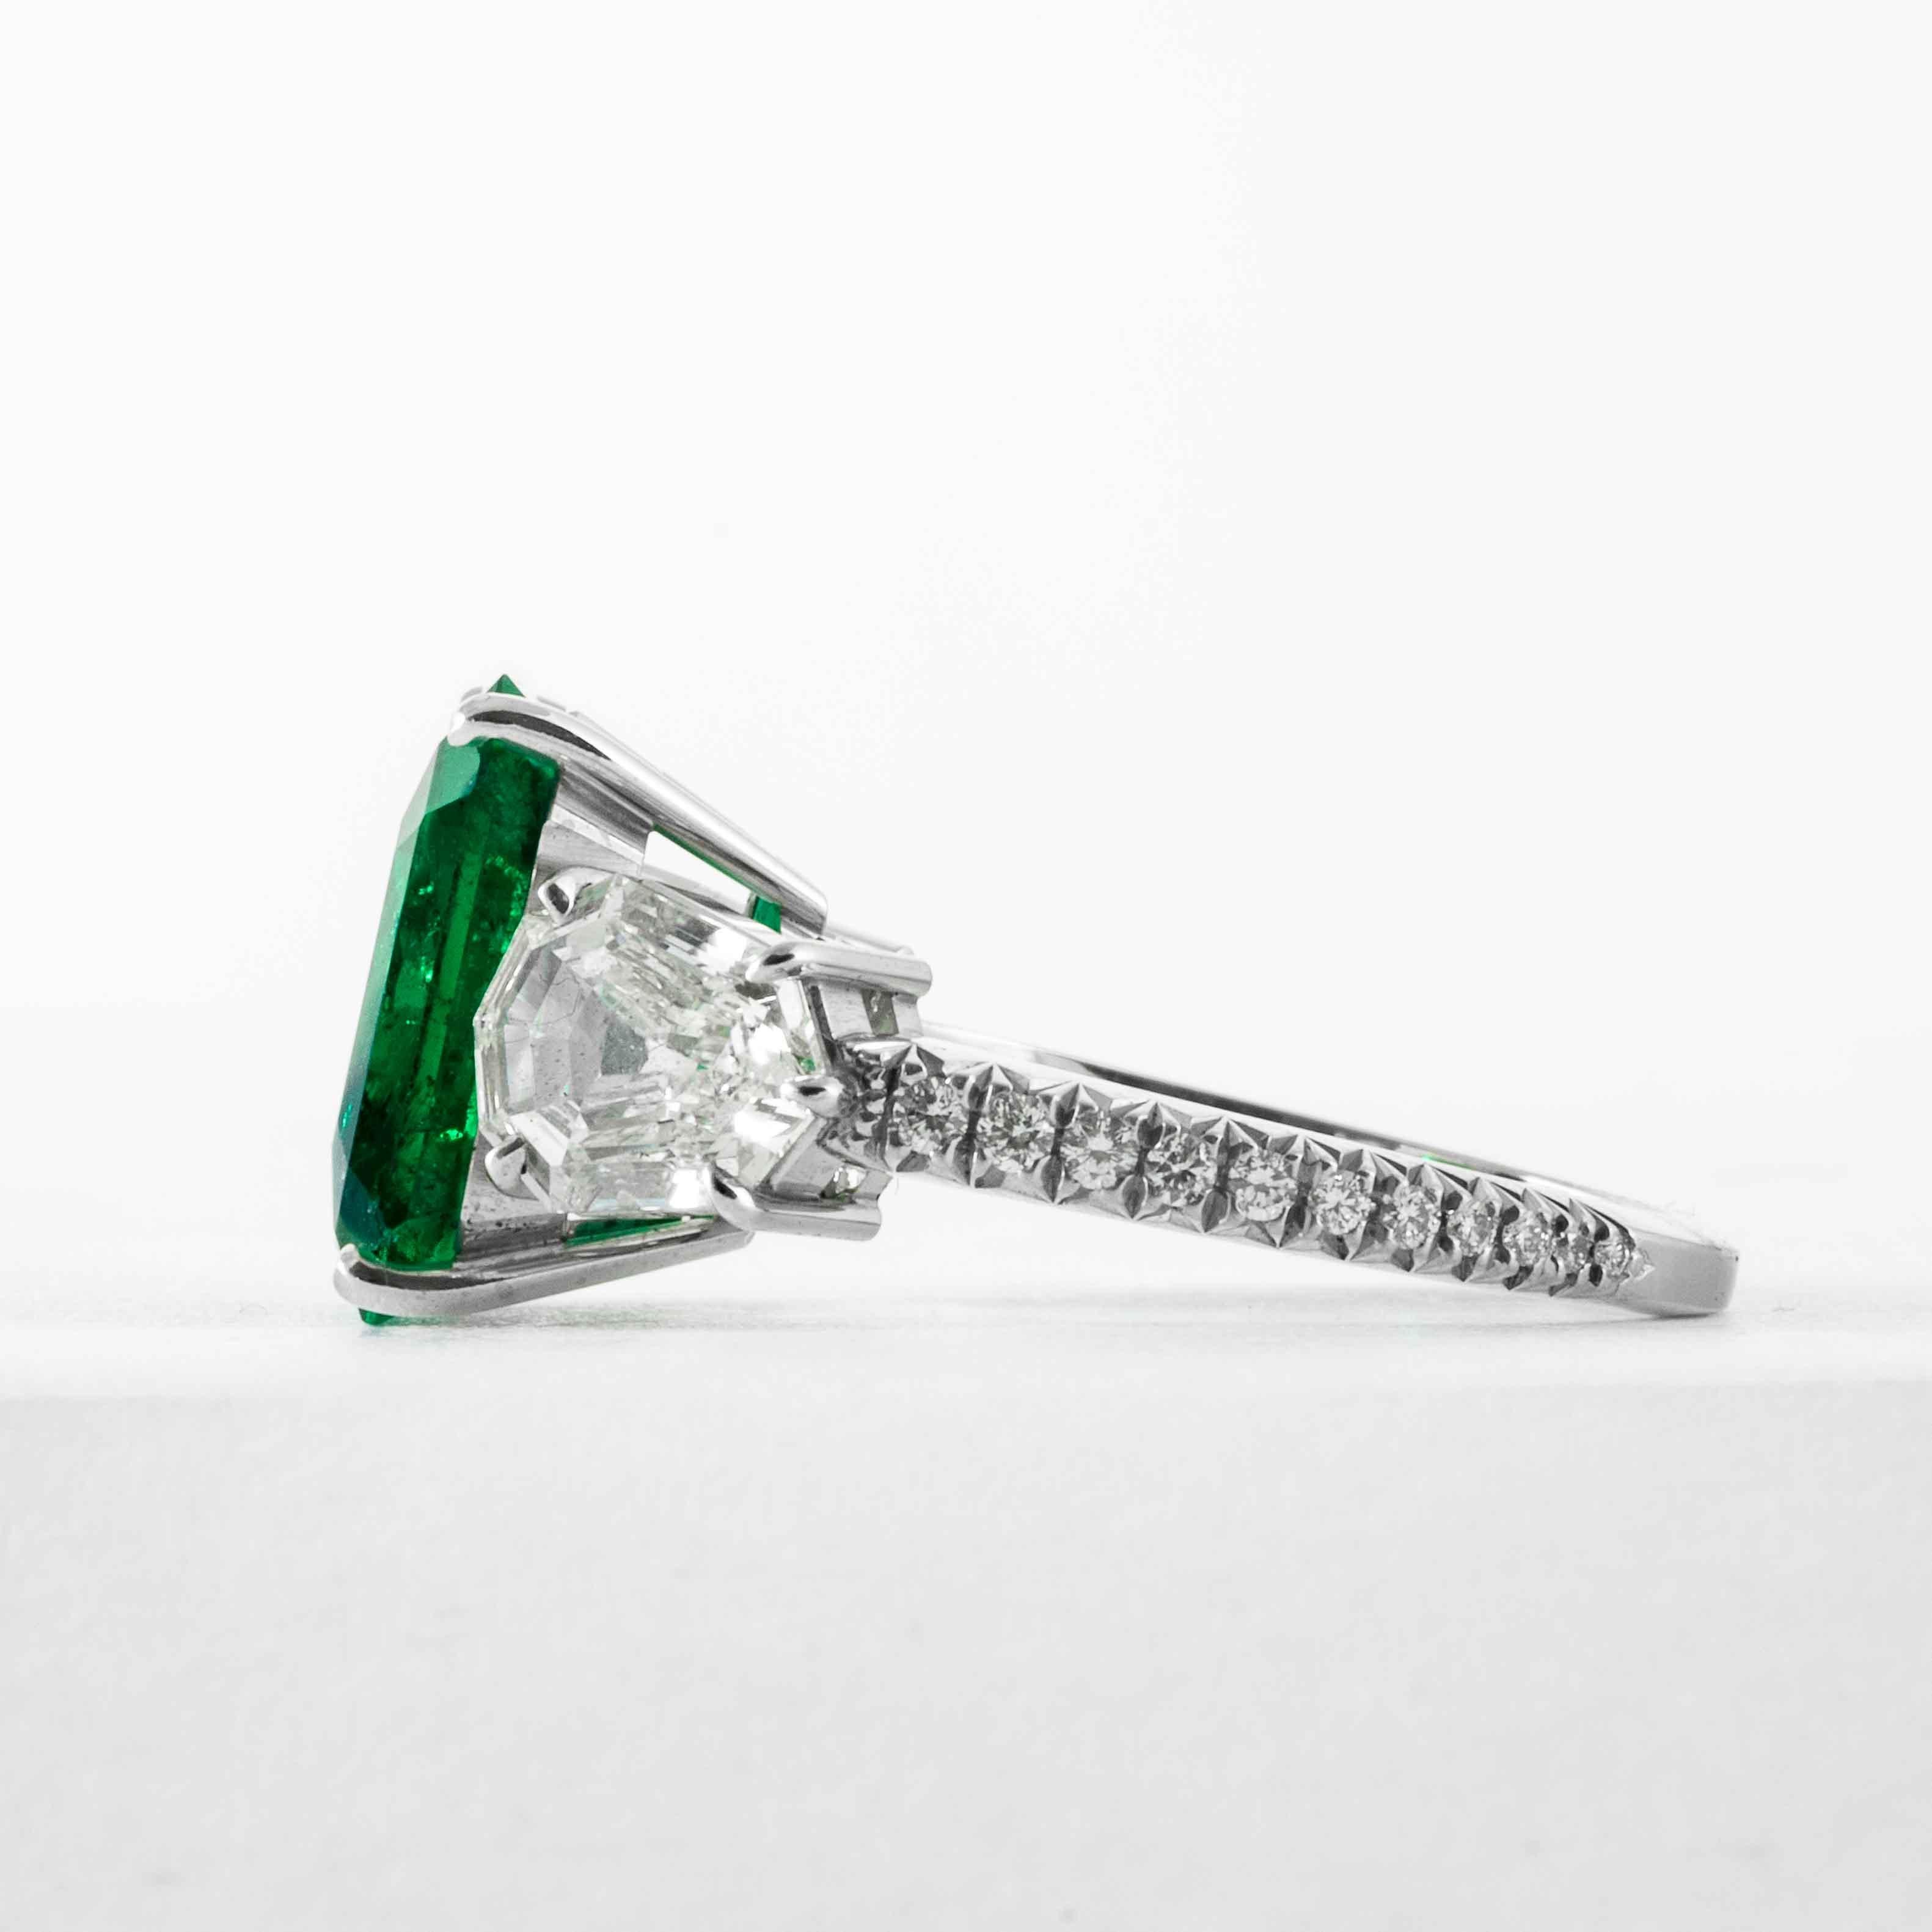 Shreve, Crump & Low 5.48 Carat Colombian Emerald and Diamond White Gold Ring In New Condition For Sale In Boston, MA